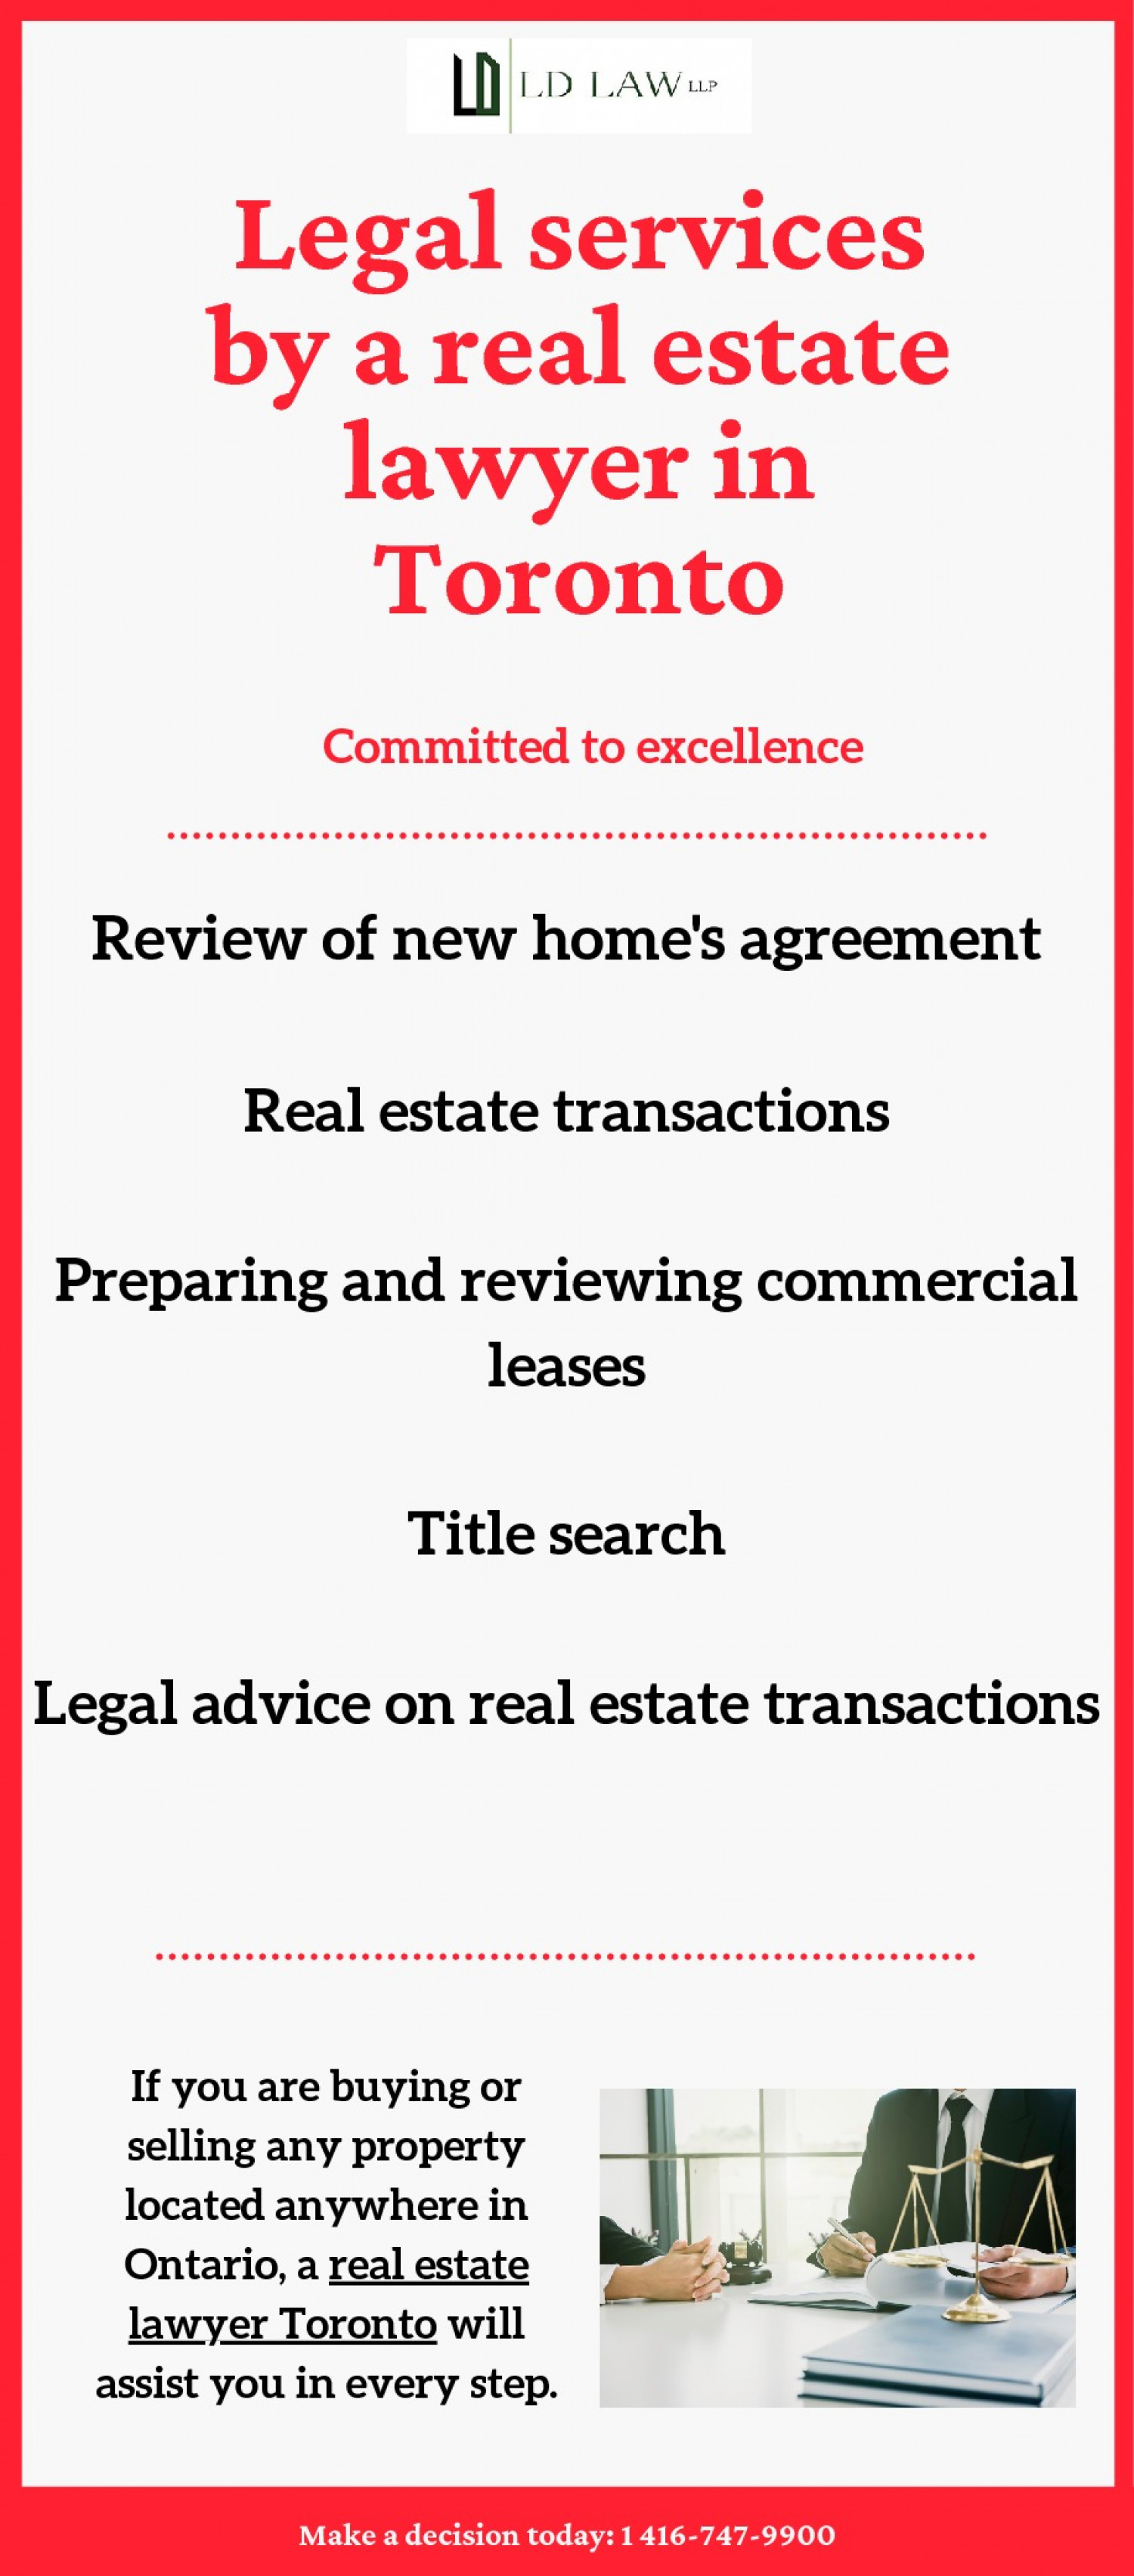 Is it Important To Take the Legal Services By a Real Estate Lawyer? Infographic